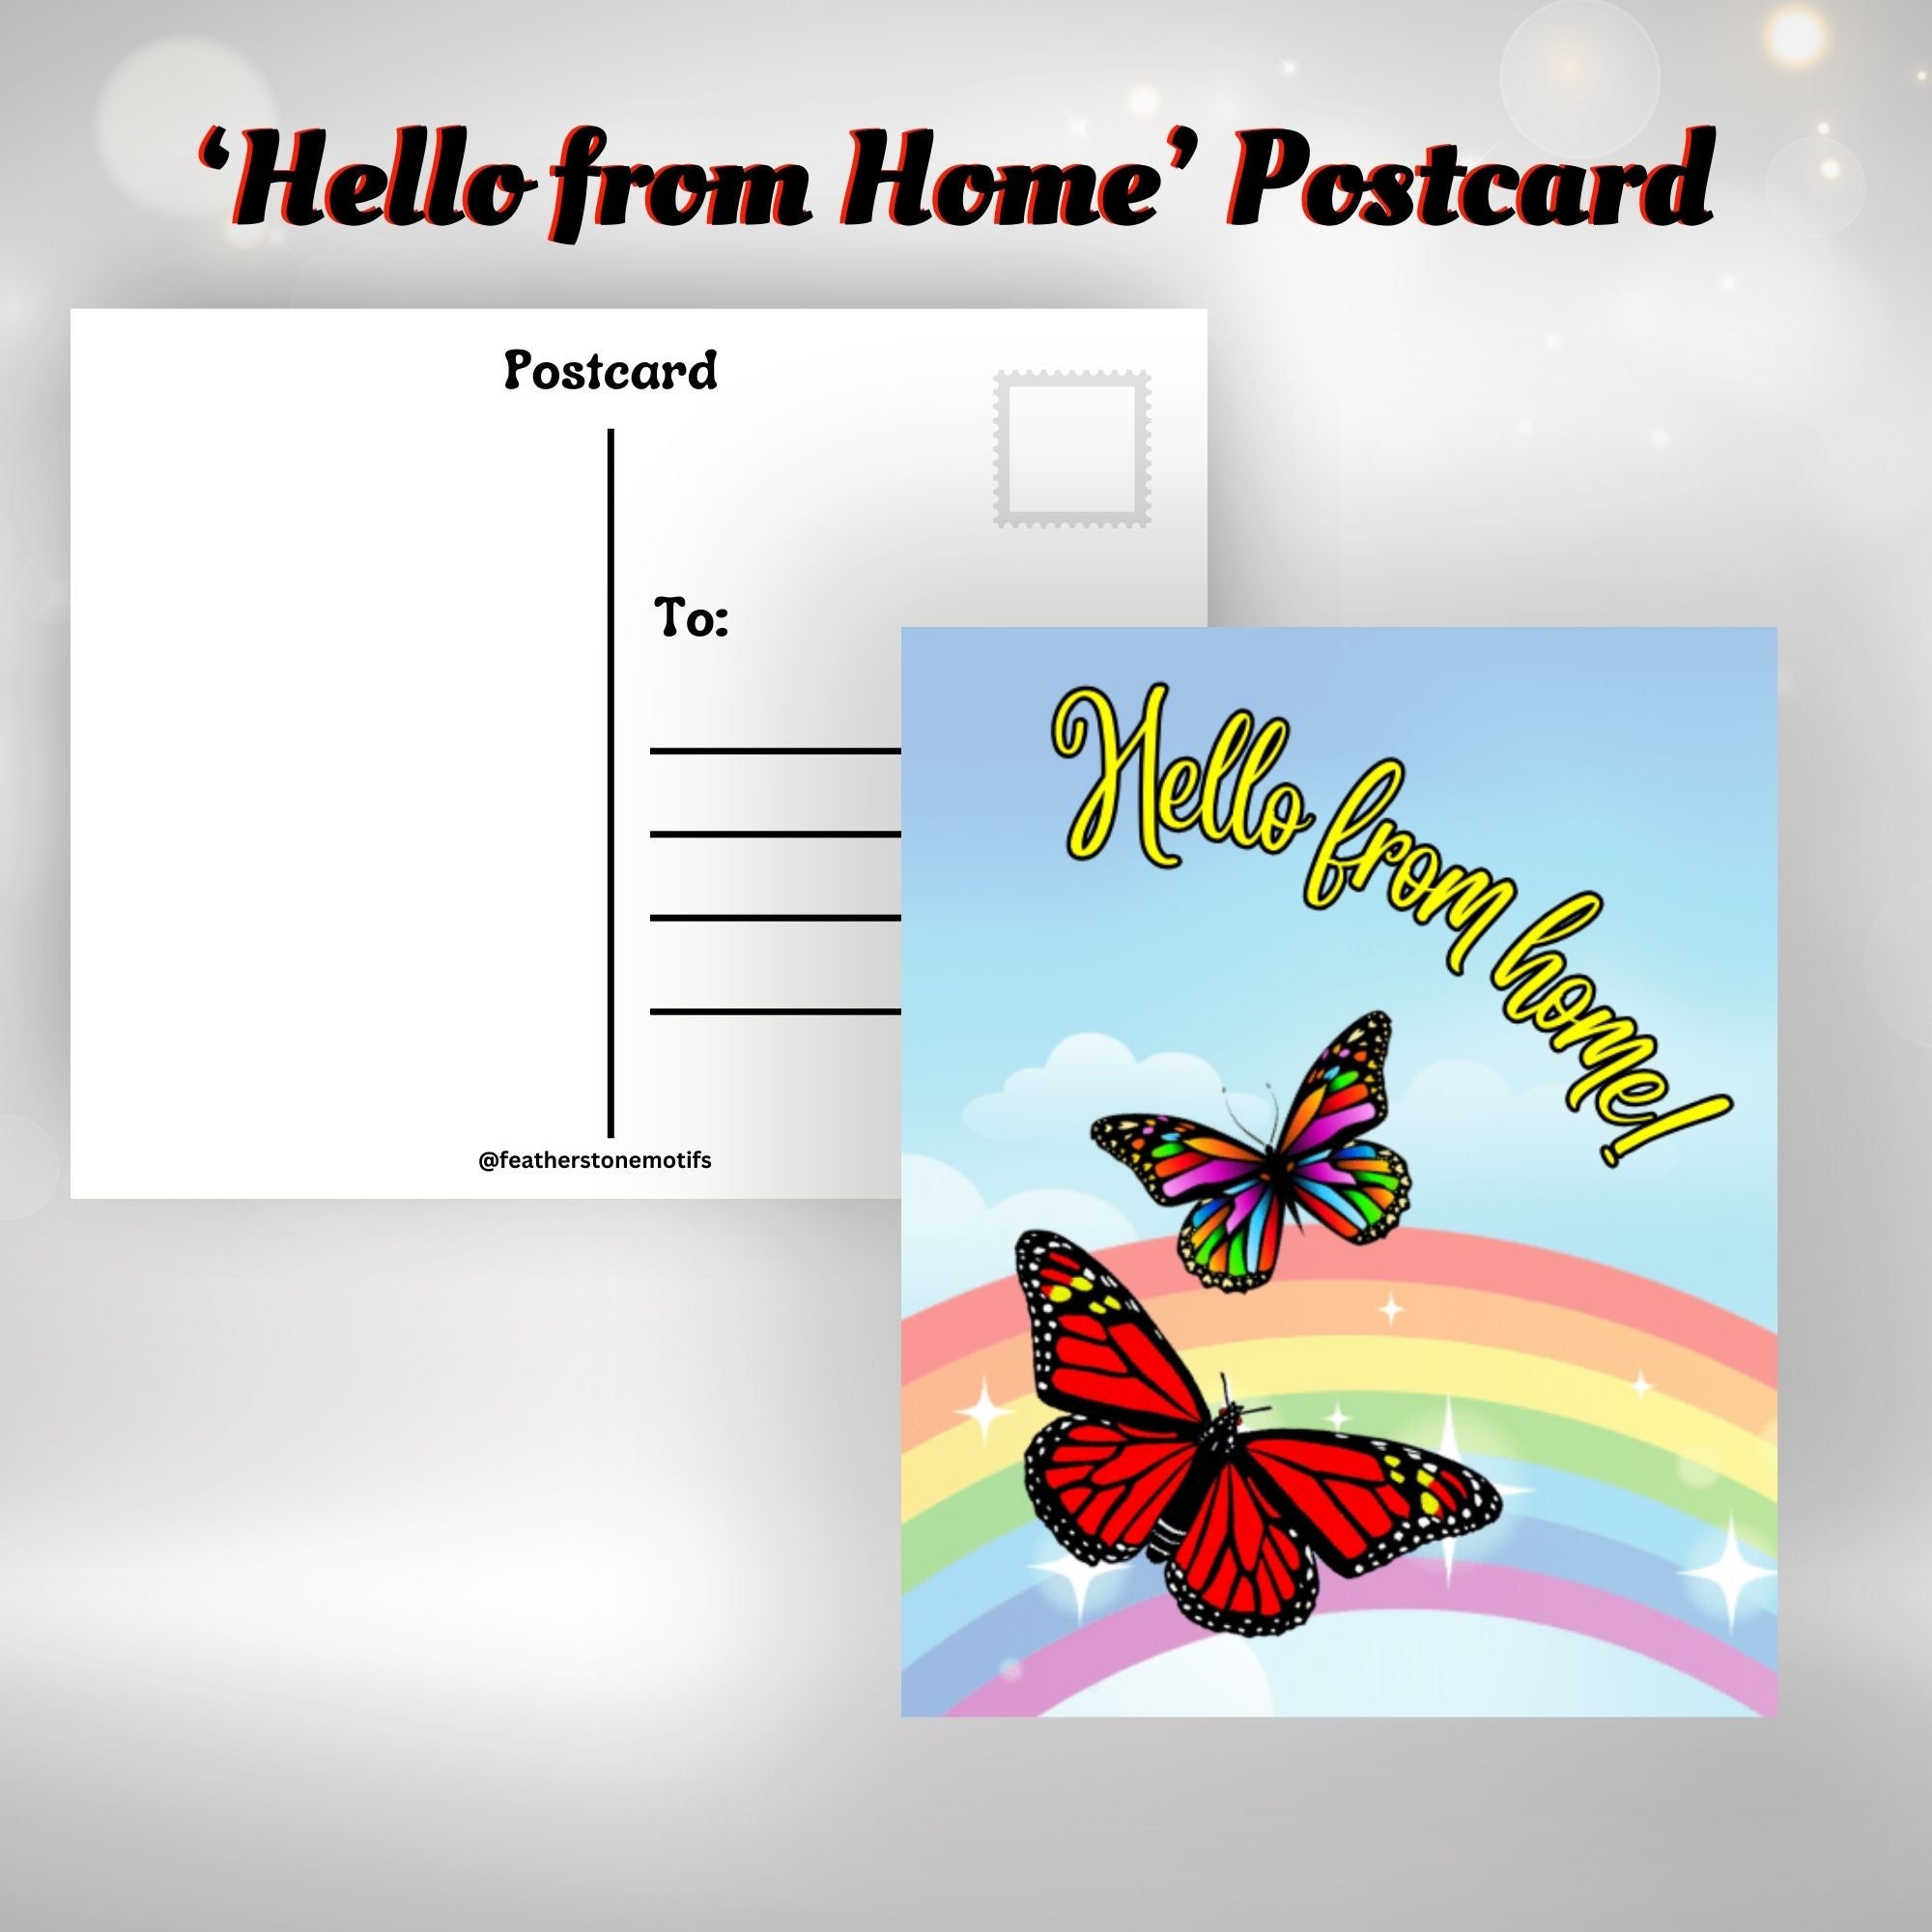 This image shows the Hello from home! postcard with two Monarch butterflies in front of a rainbow.